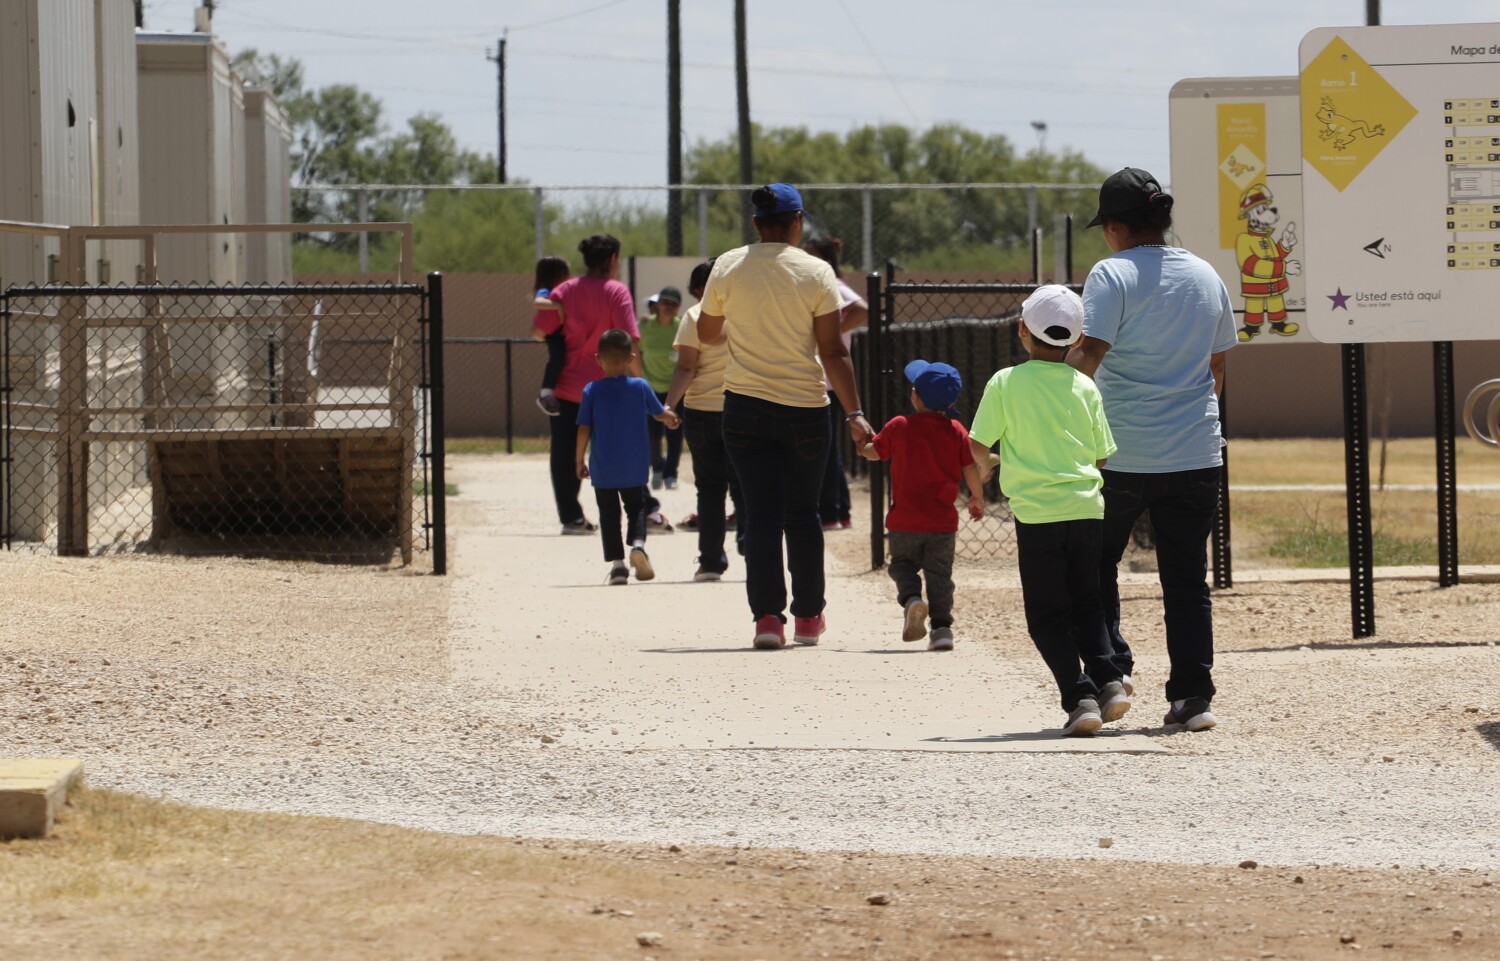 Biden administration halts immigrant family detention for now